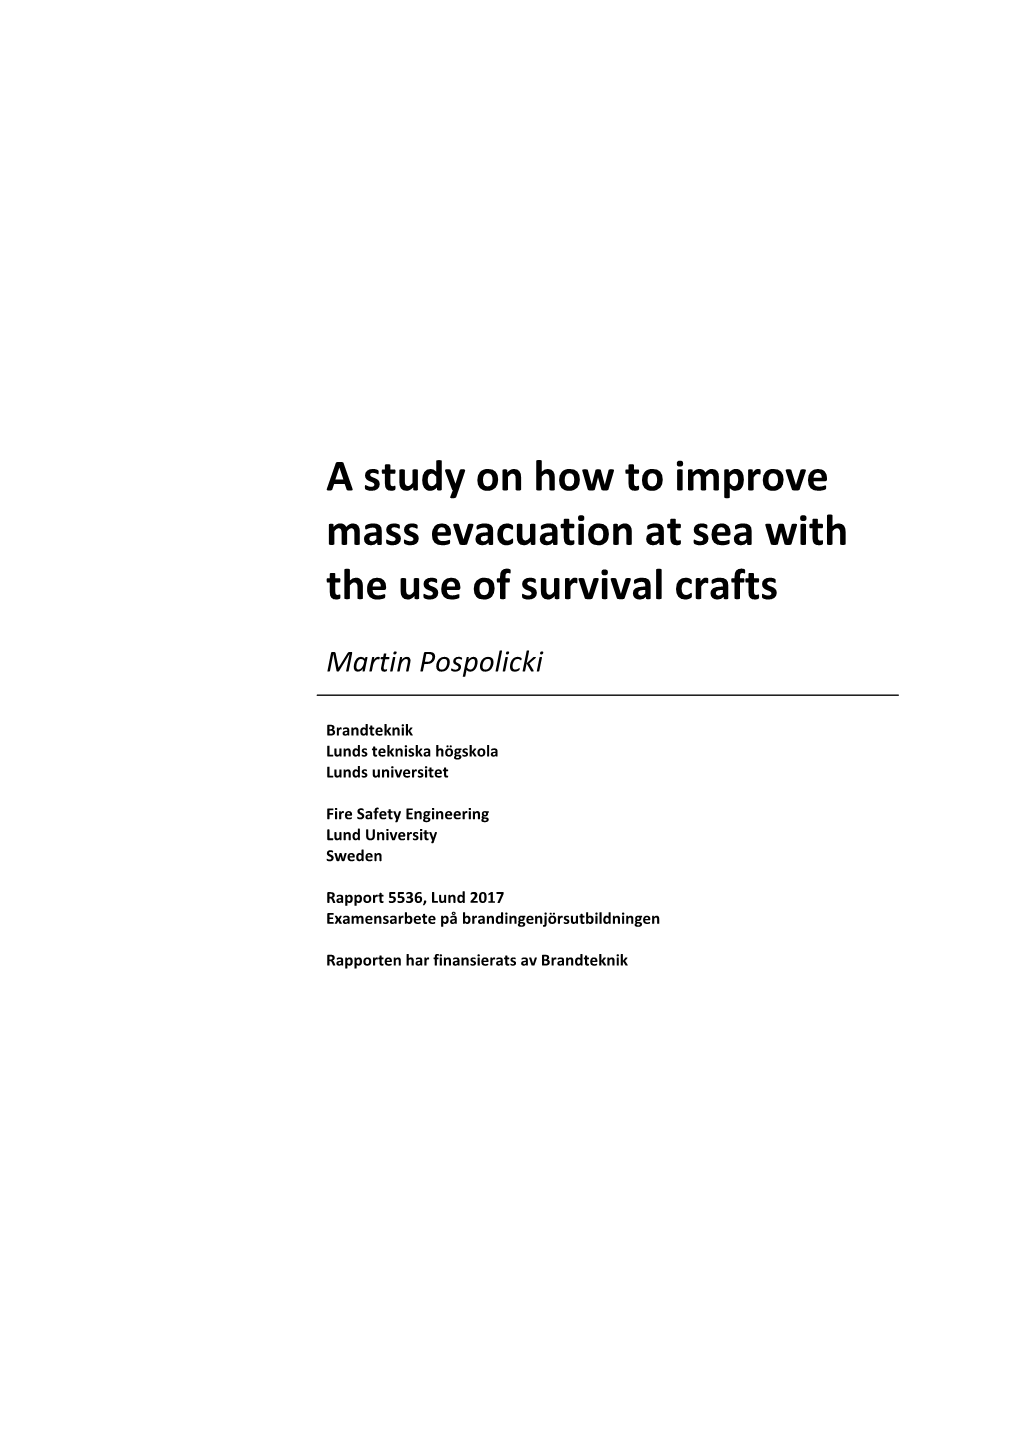 Mass Evacuation at Sea with the Use of Survival Crafts